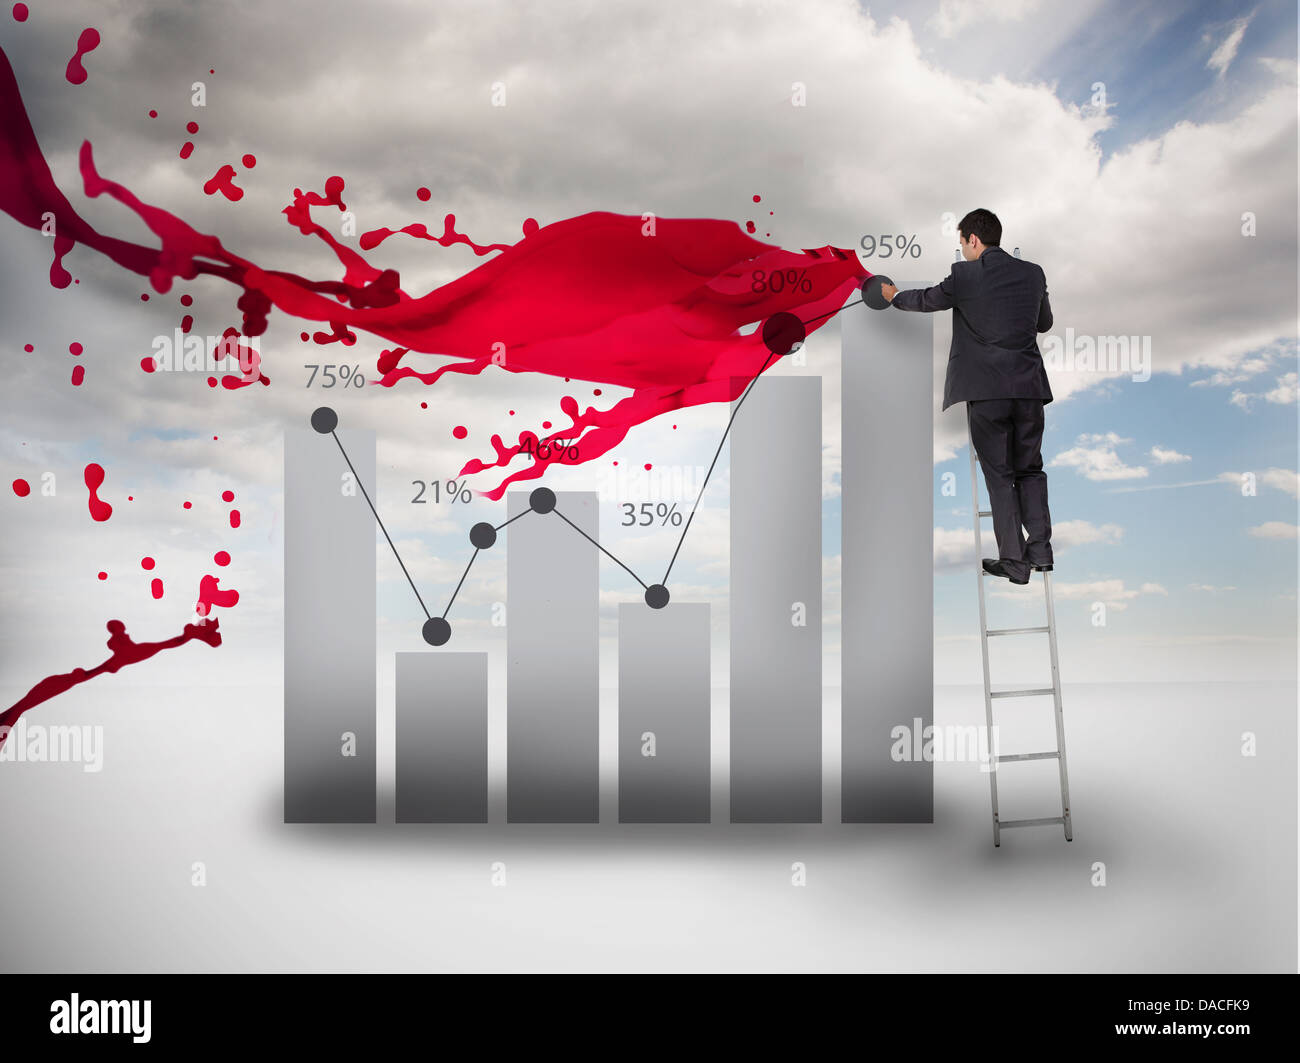 Businessman drawing a chart next to red paint splash Stock Photo